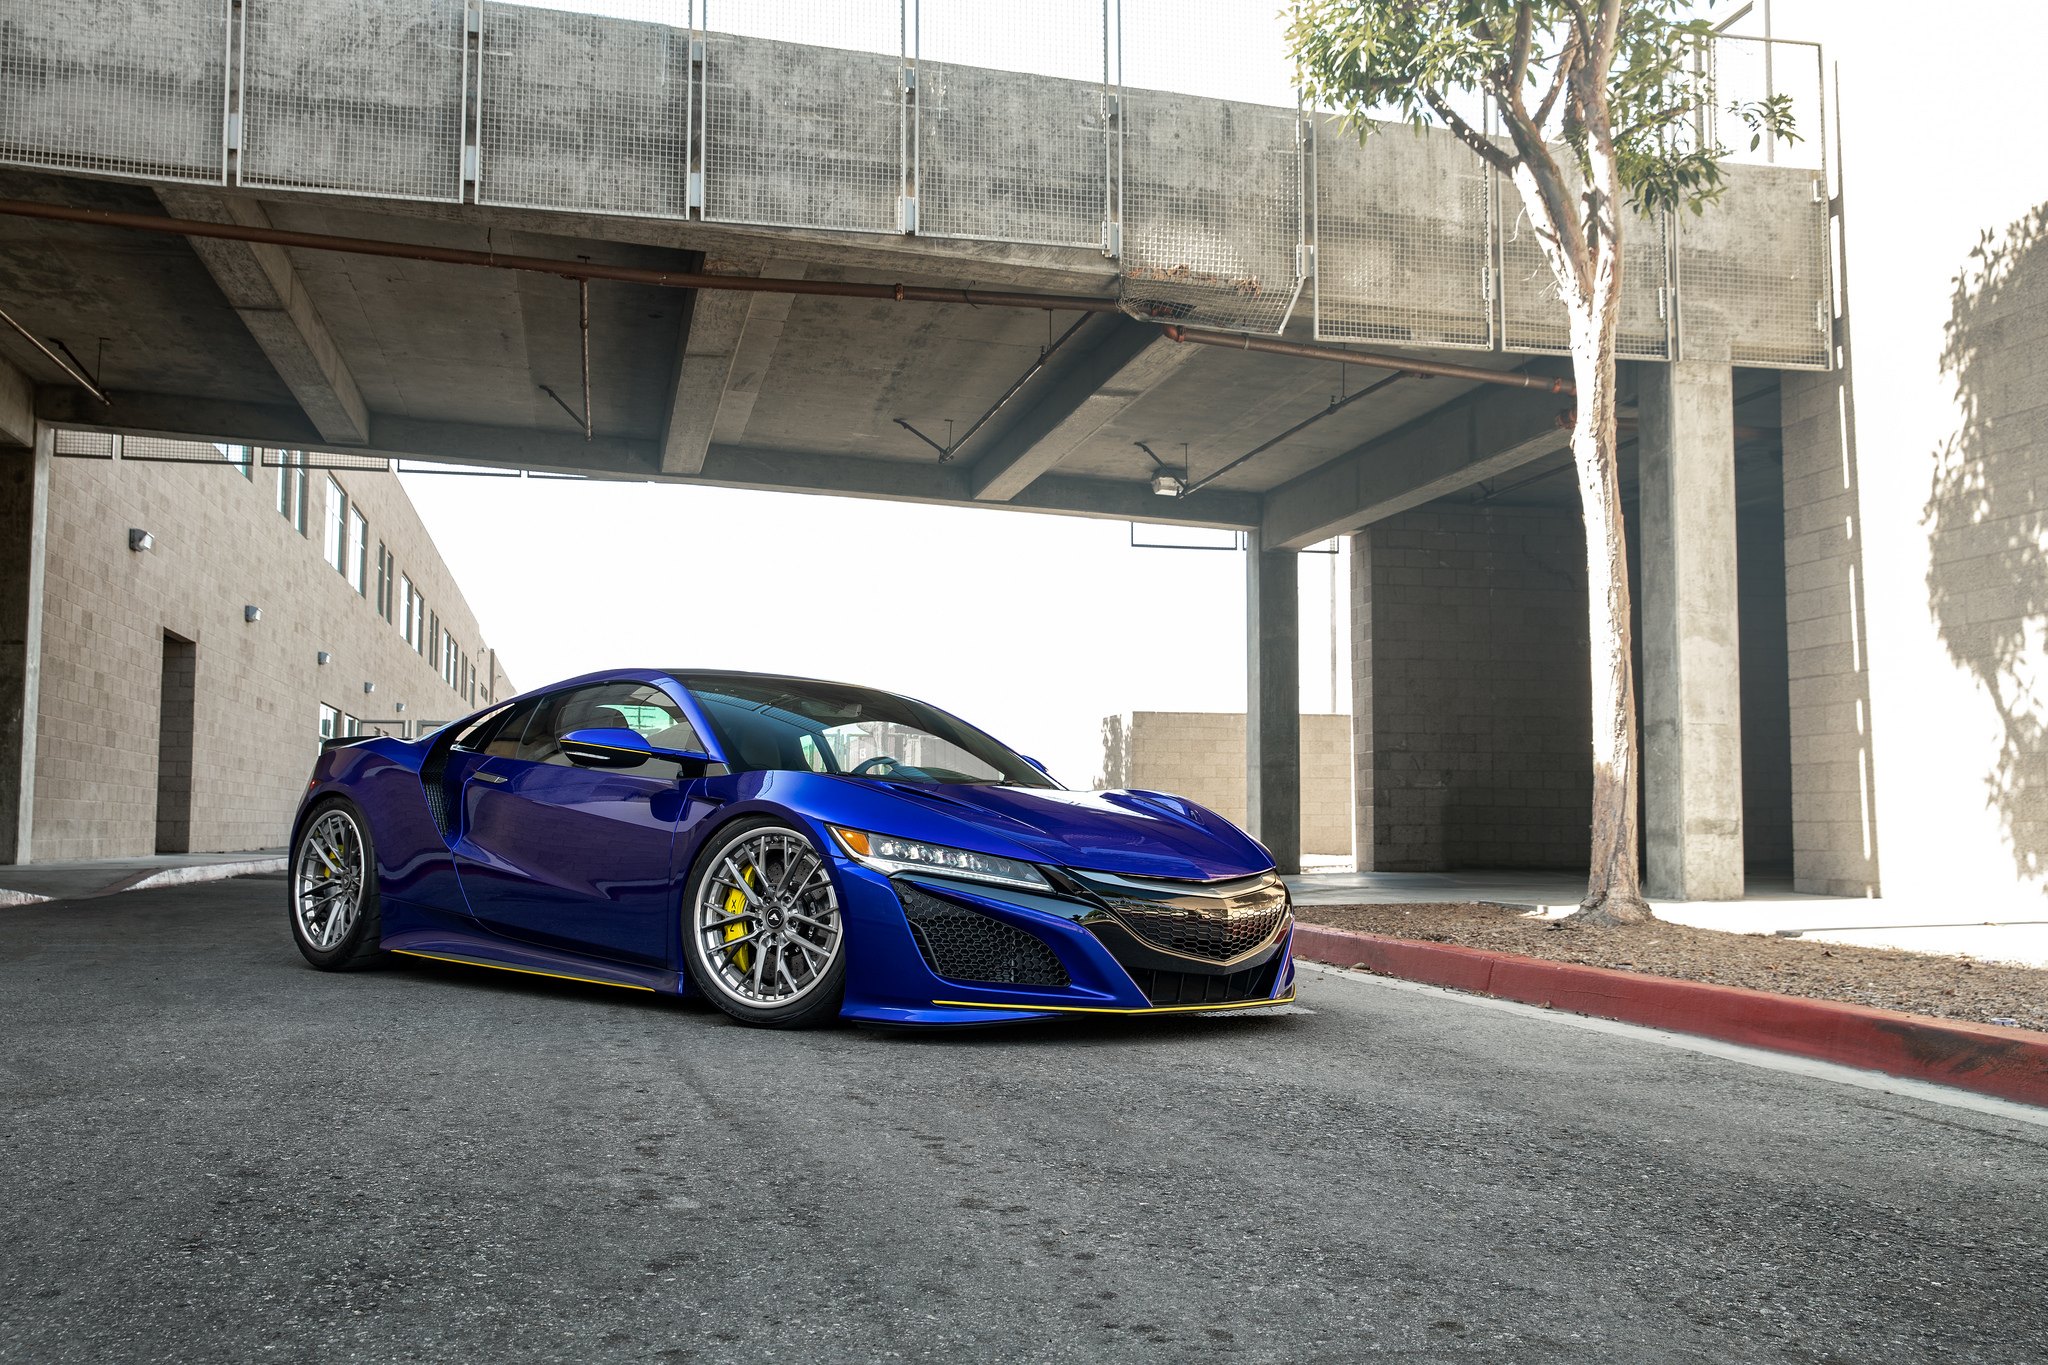 Blacked Out Mesh Grille on Blue Acura NSX - Photo by Vorsteiner